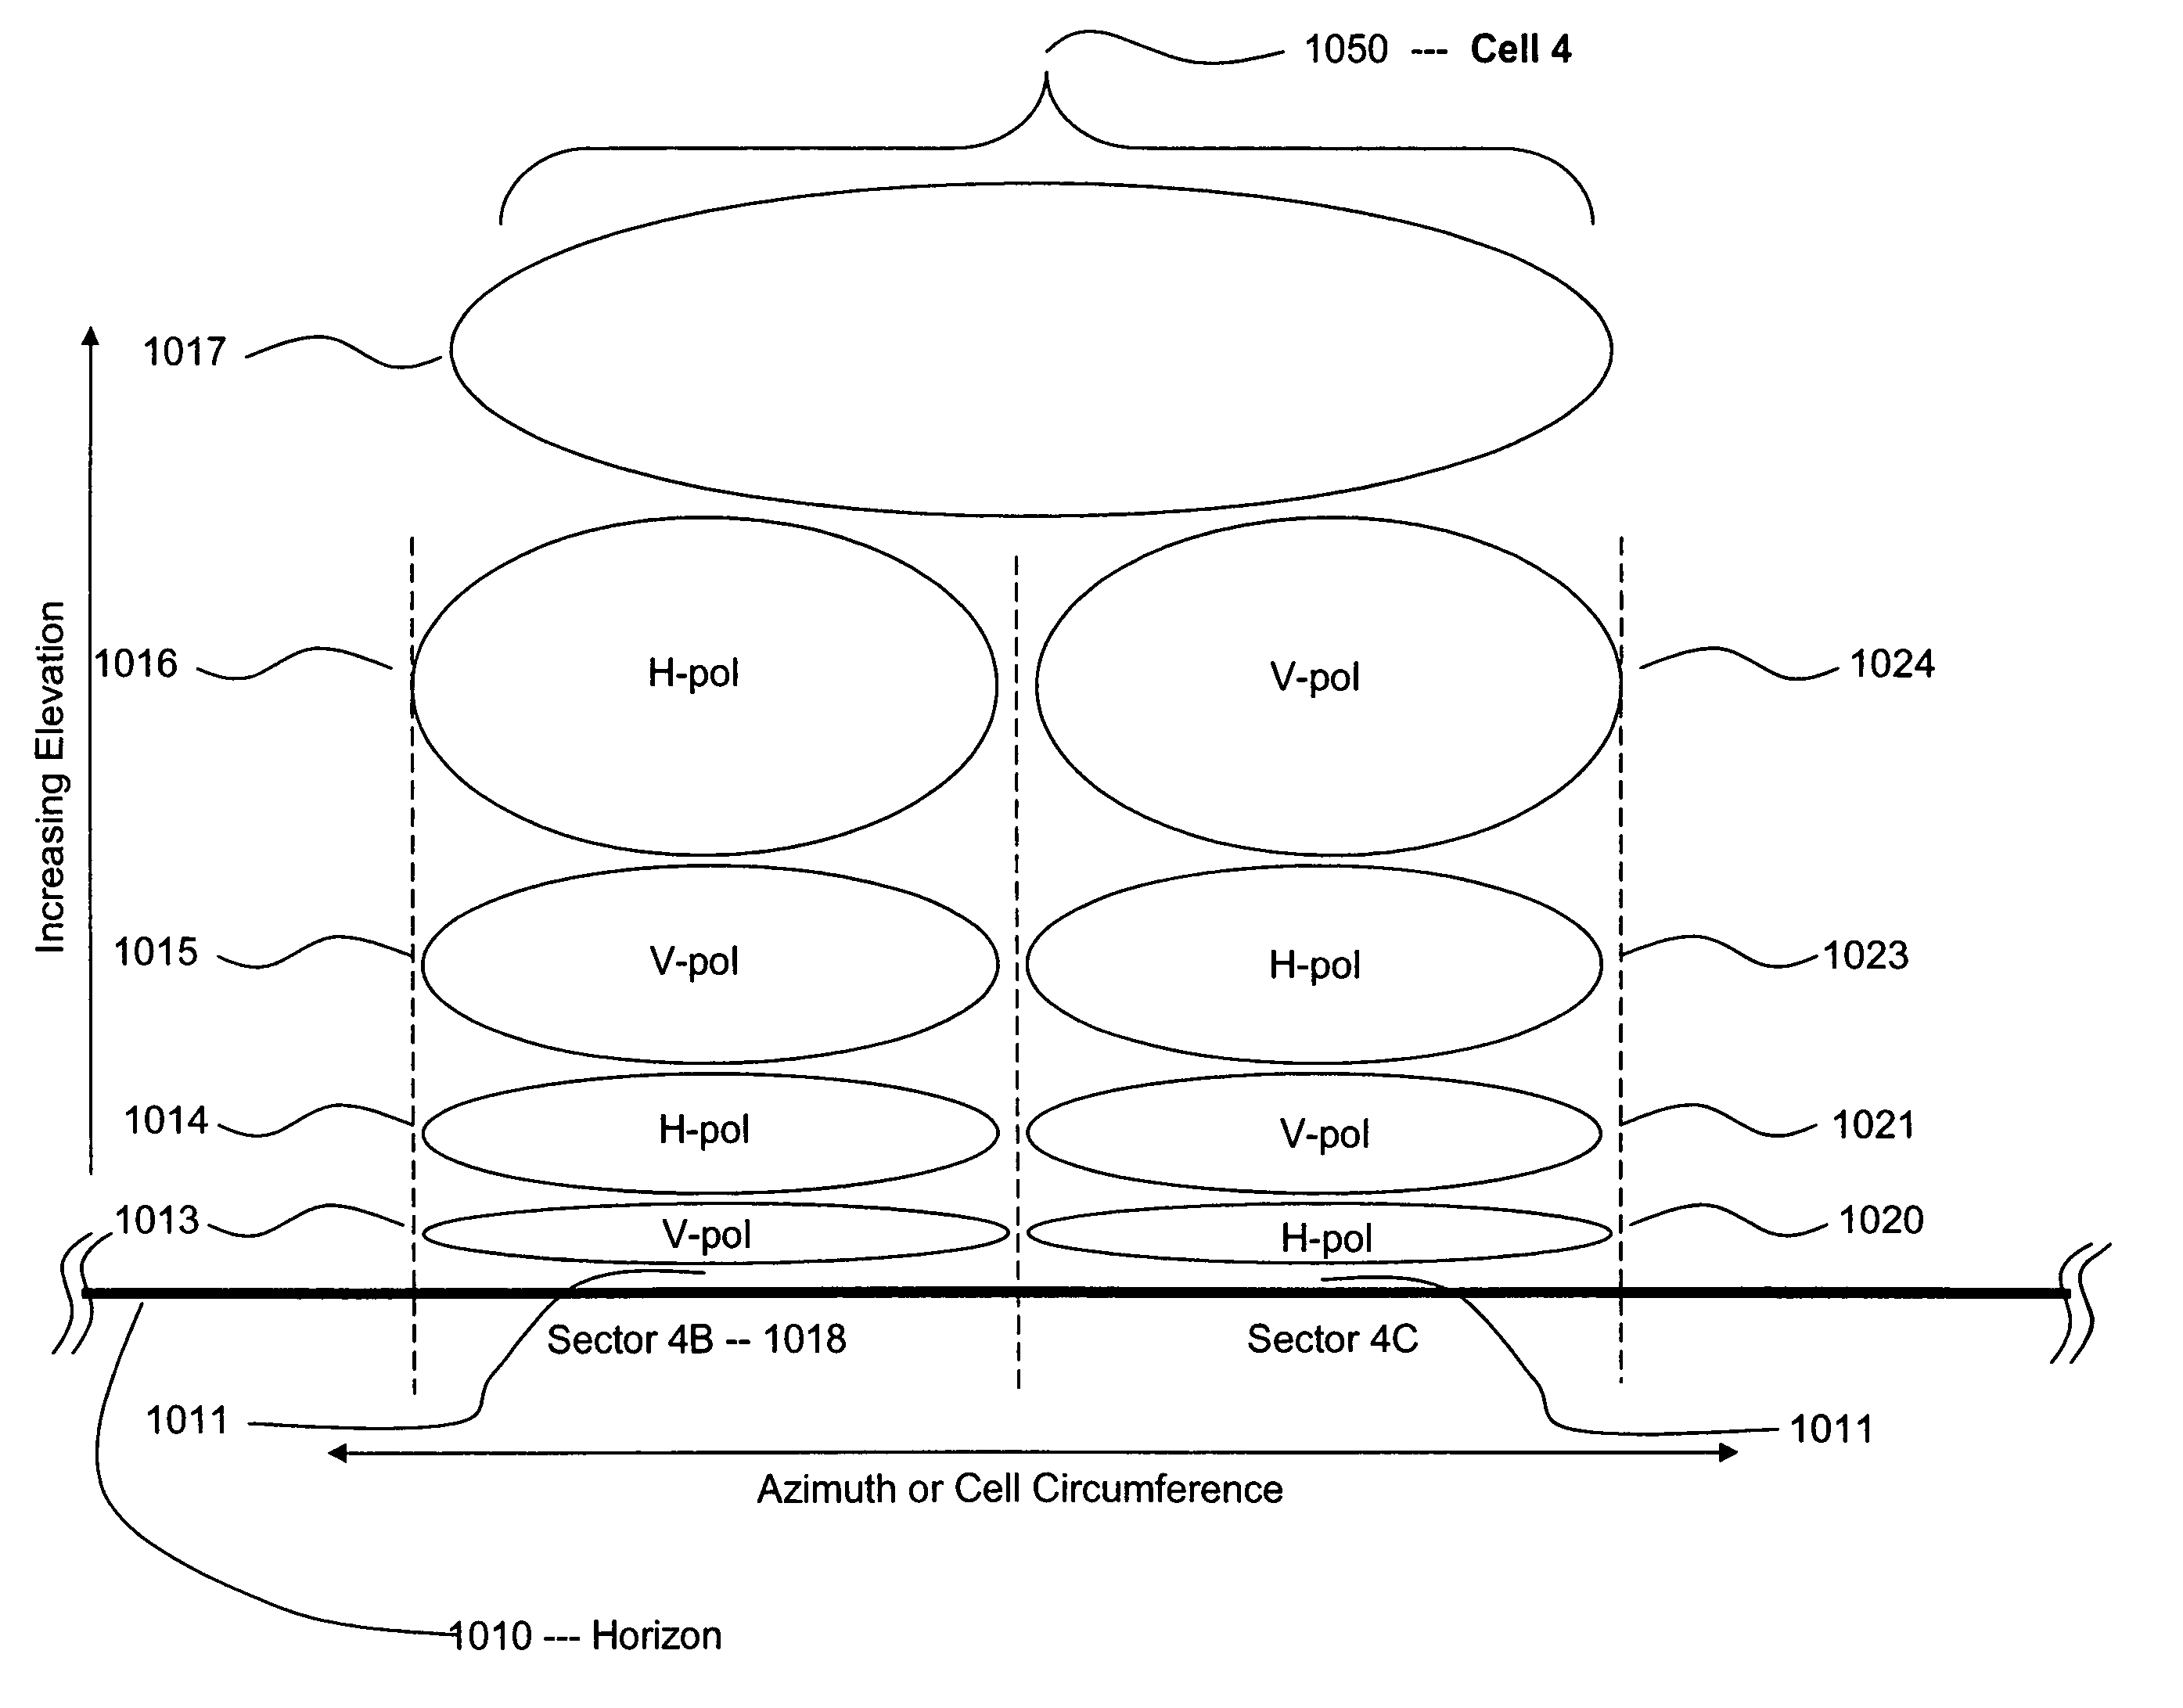 Air-to-ground cellular communication network terrestrial base station having multi-dimensional sectors with alternating radio frequency polarizations